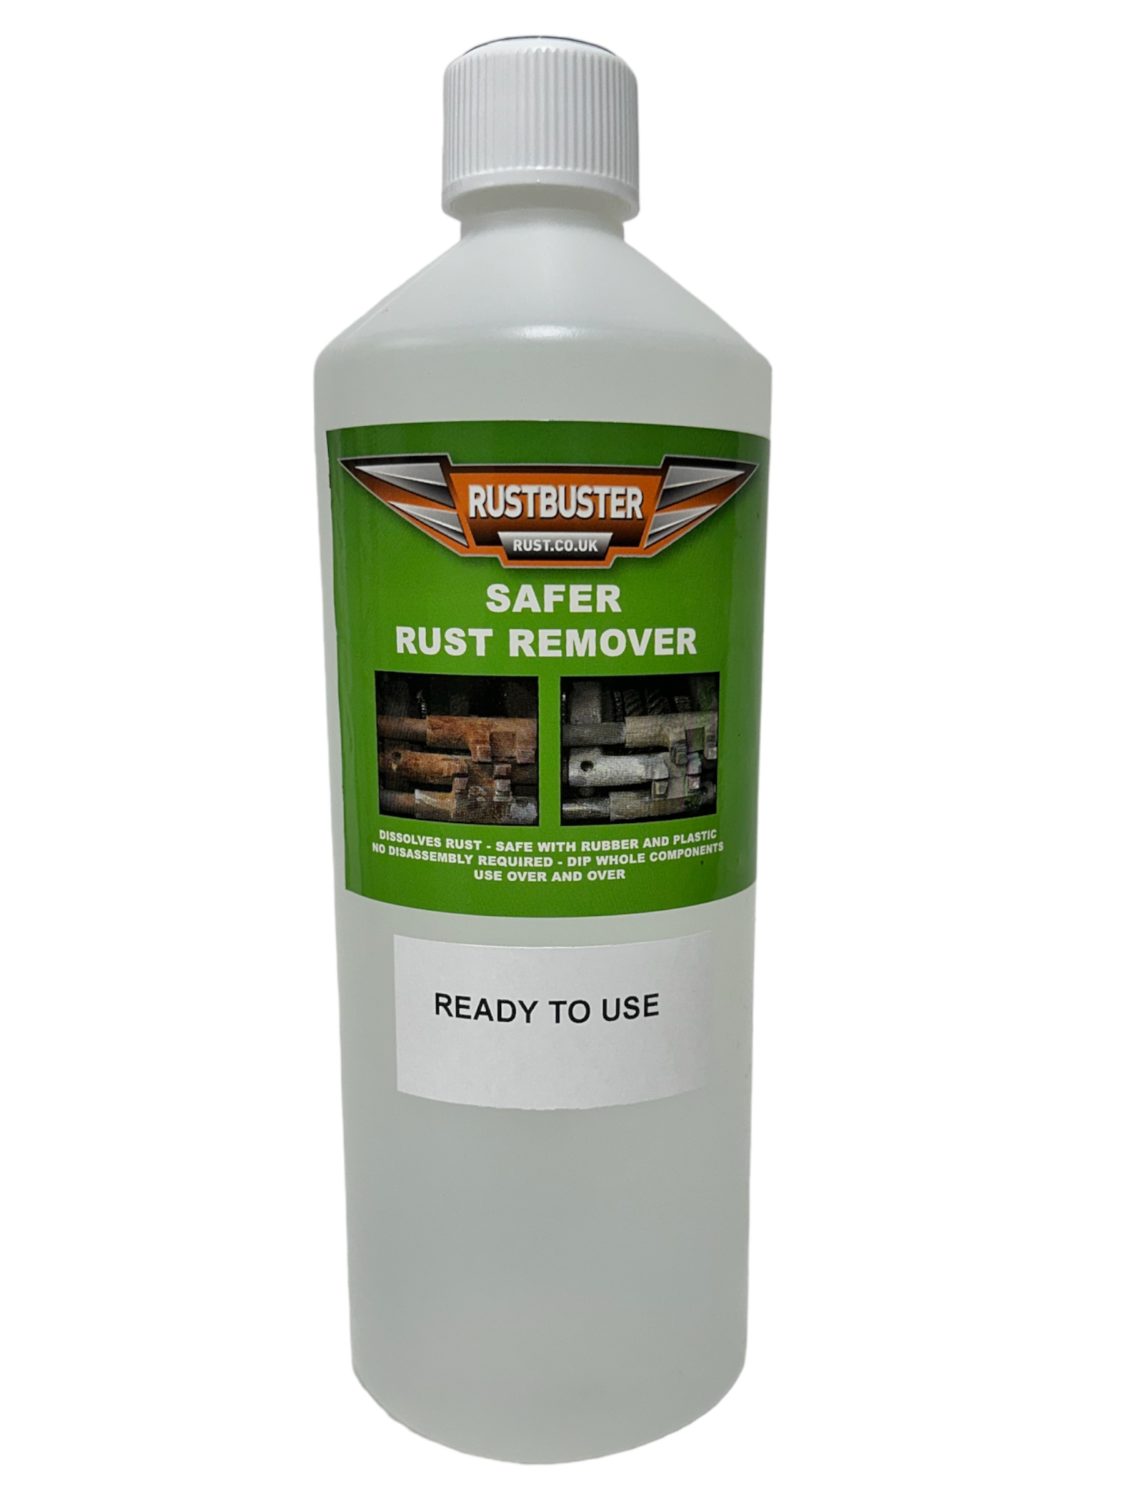 Rustbuster Safer Rust Remover is BACK